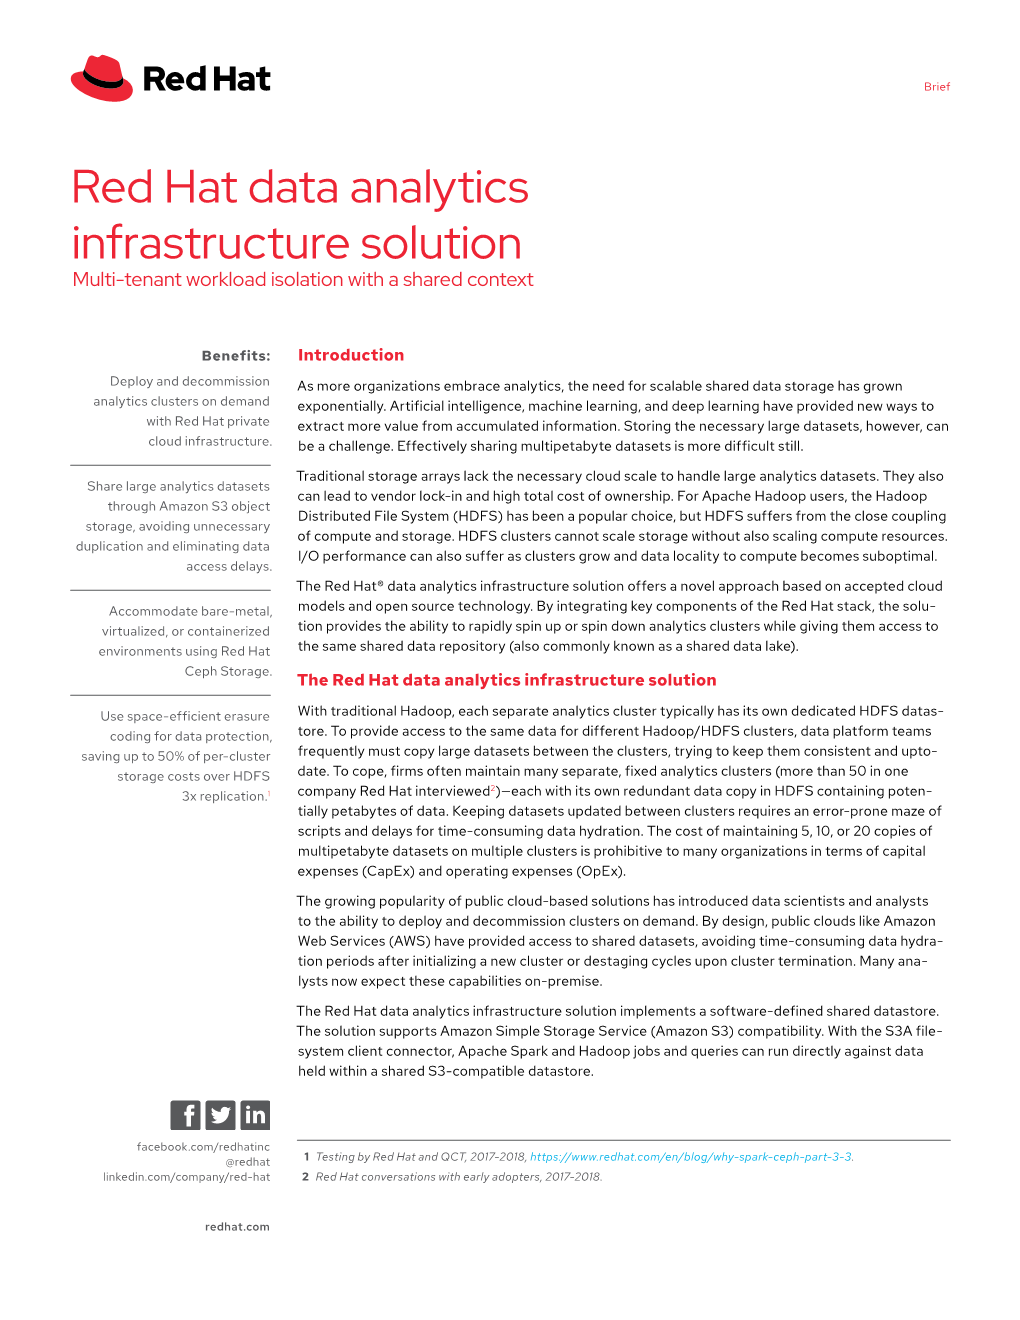 Red Hat Data Analytics Infrastructure Solution Multi-Tenant Workload Isolation with a Shared Context